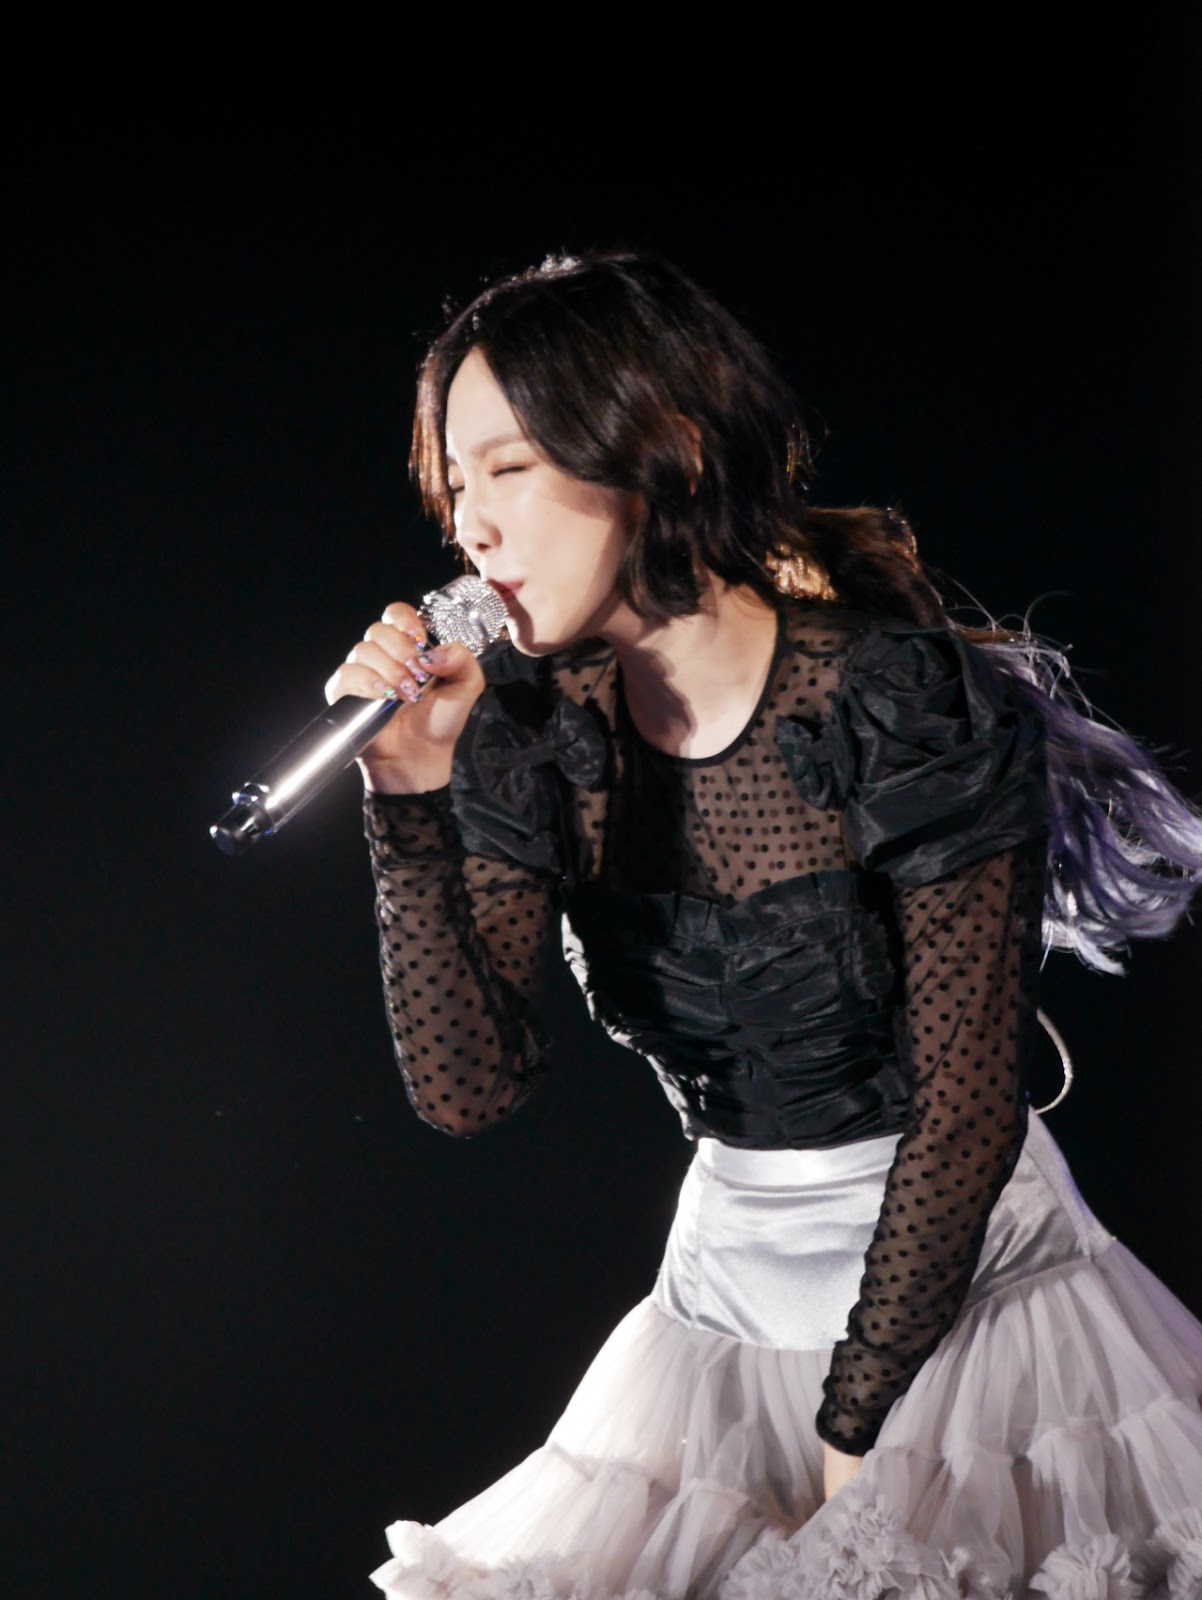 See Snsd Taeyeon S Pictures From Her Persona Concert In Hong Kong Wonderful Generation